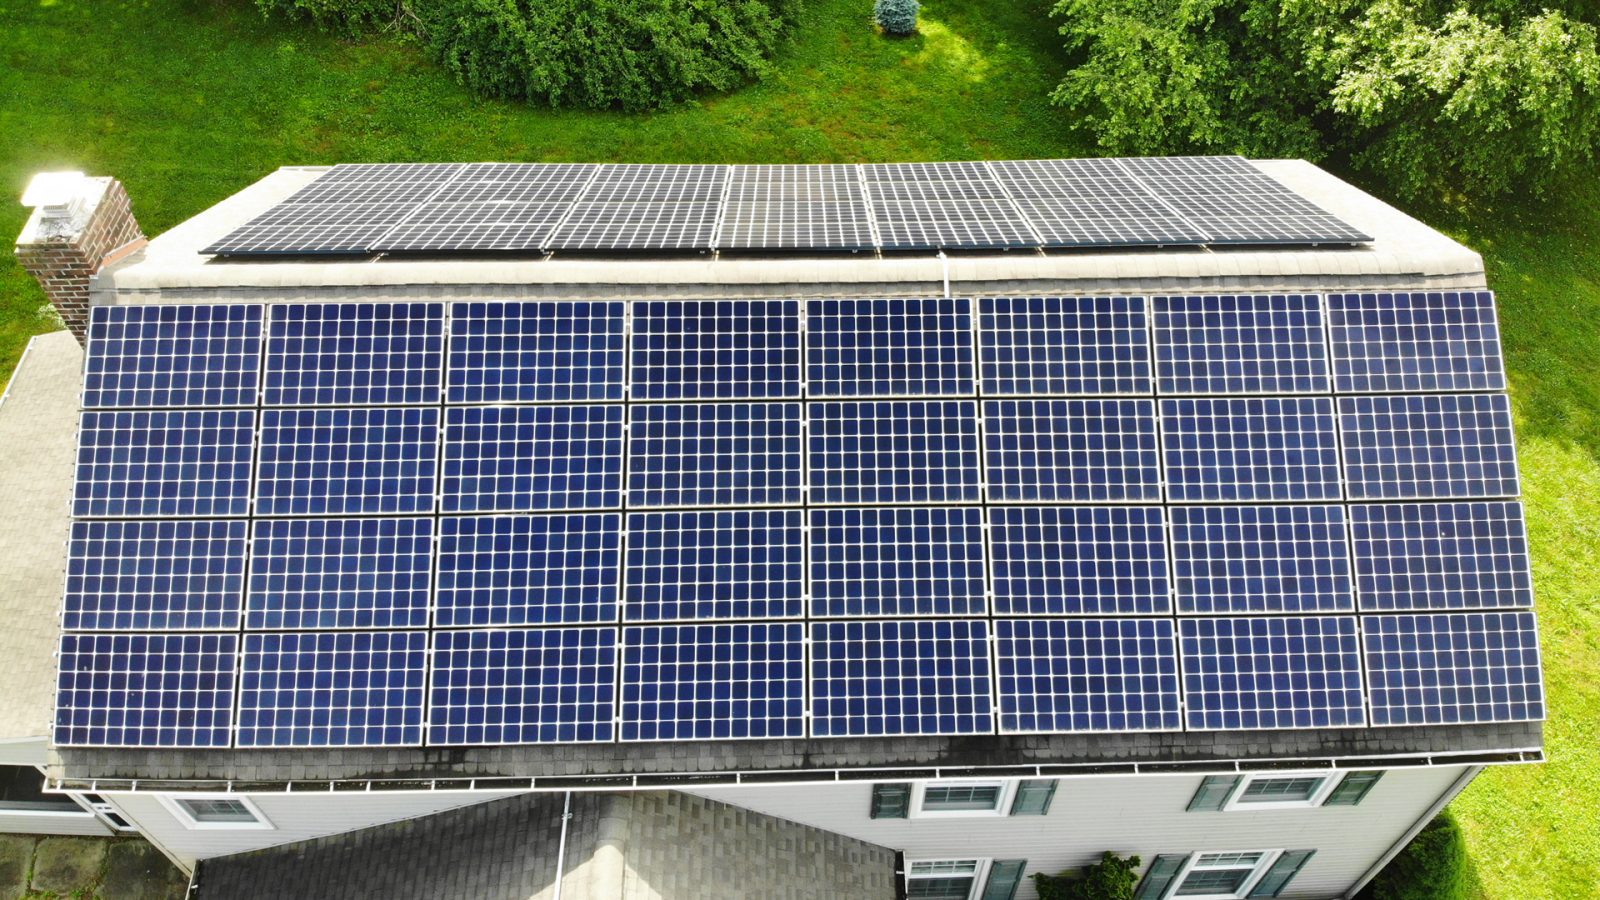 new solar panels added to existing solar installation in pa